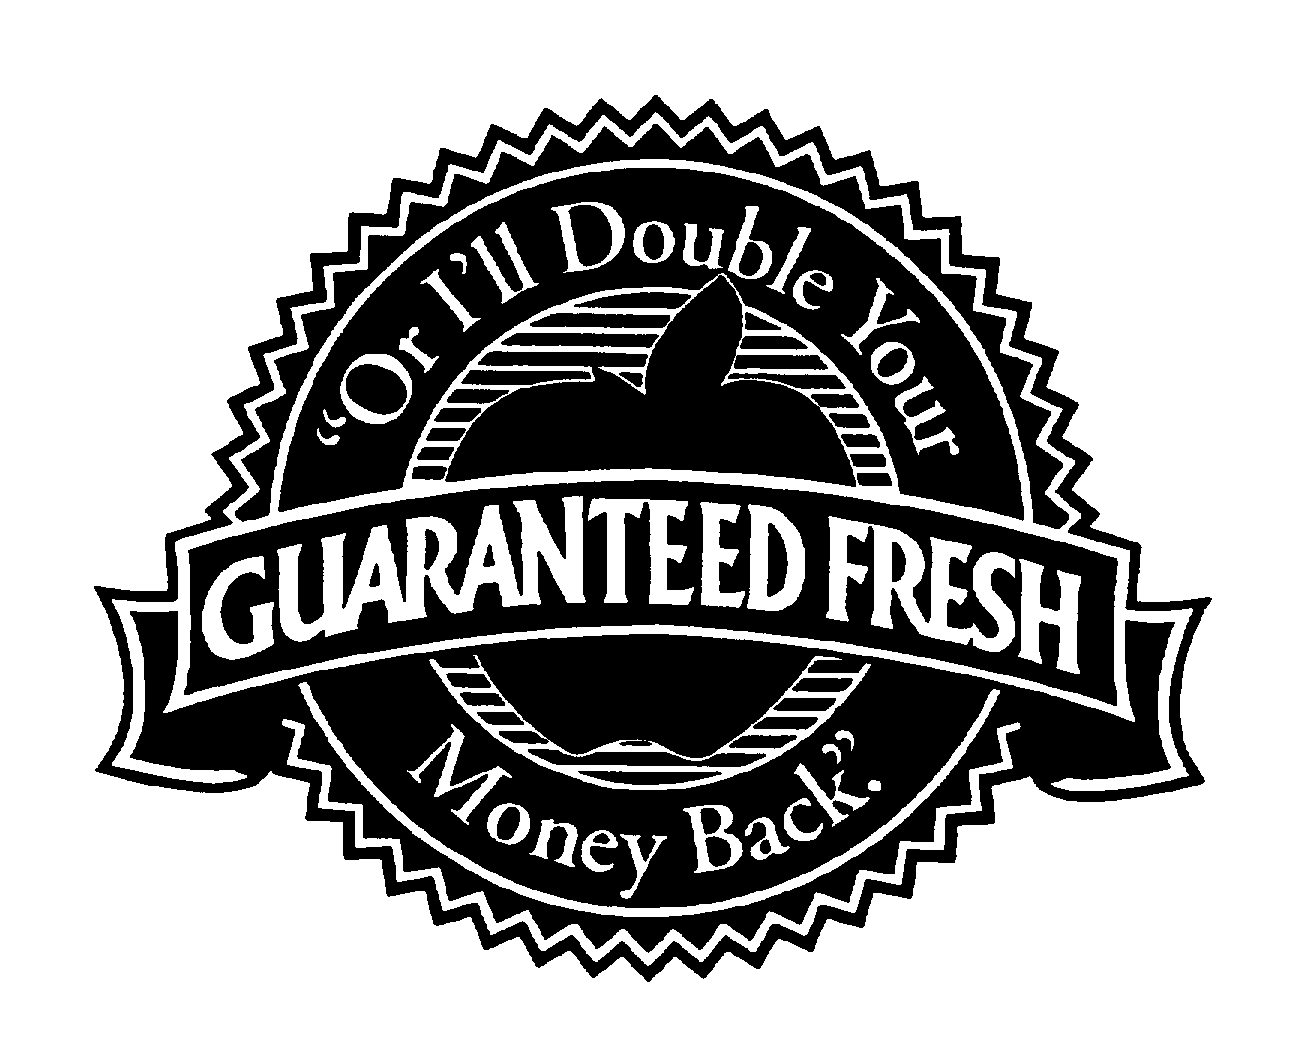  GUARANTEED FRESH "OR I'LL DOUBLE YOUR MONEY BACK".